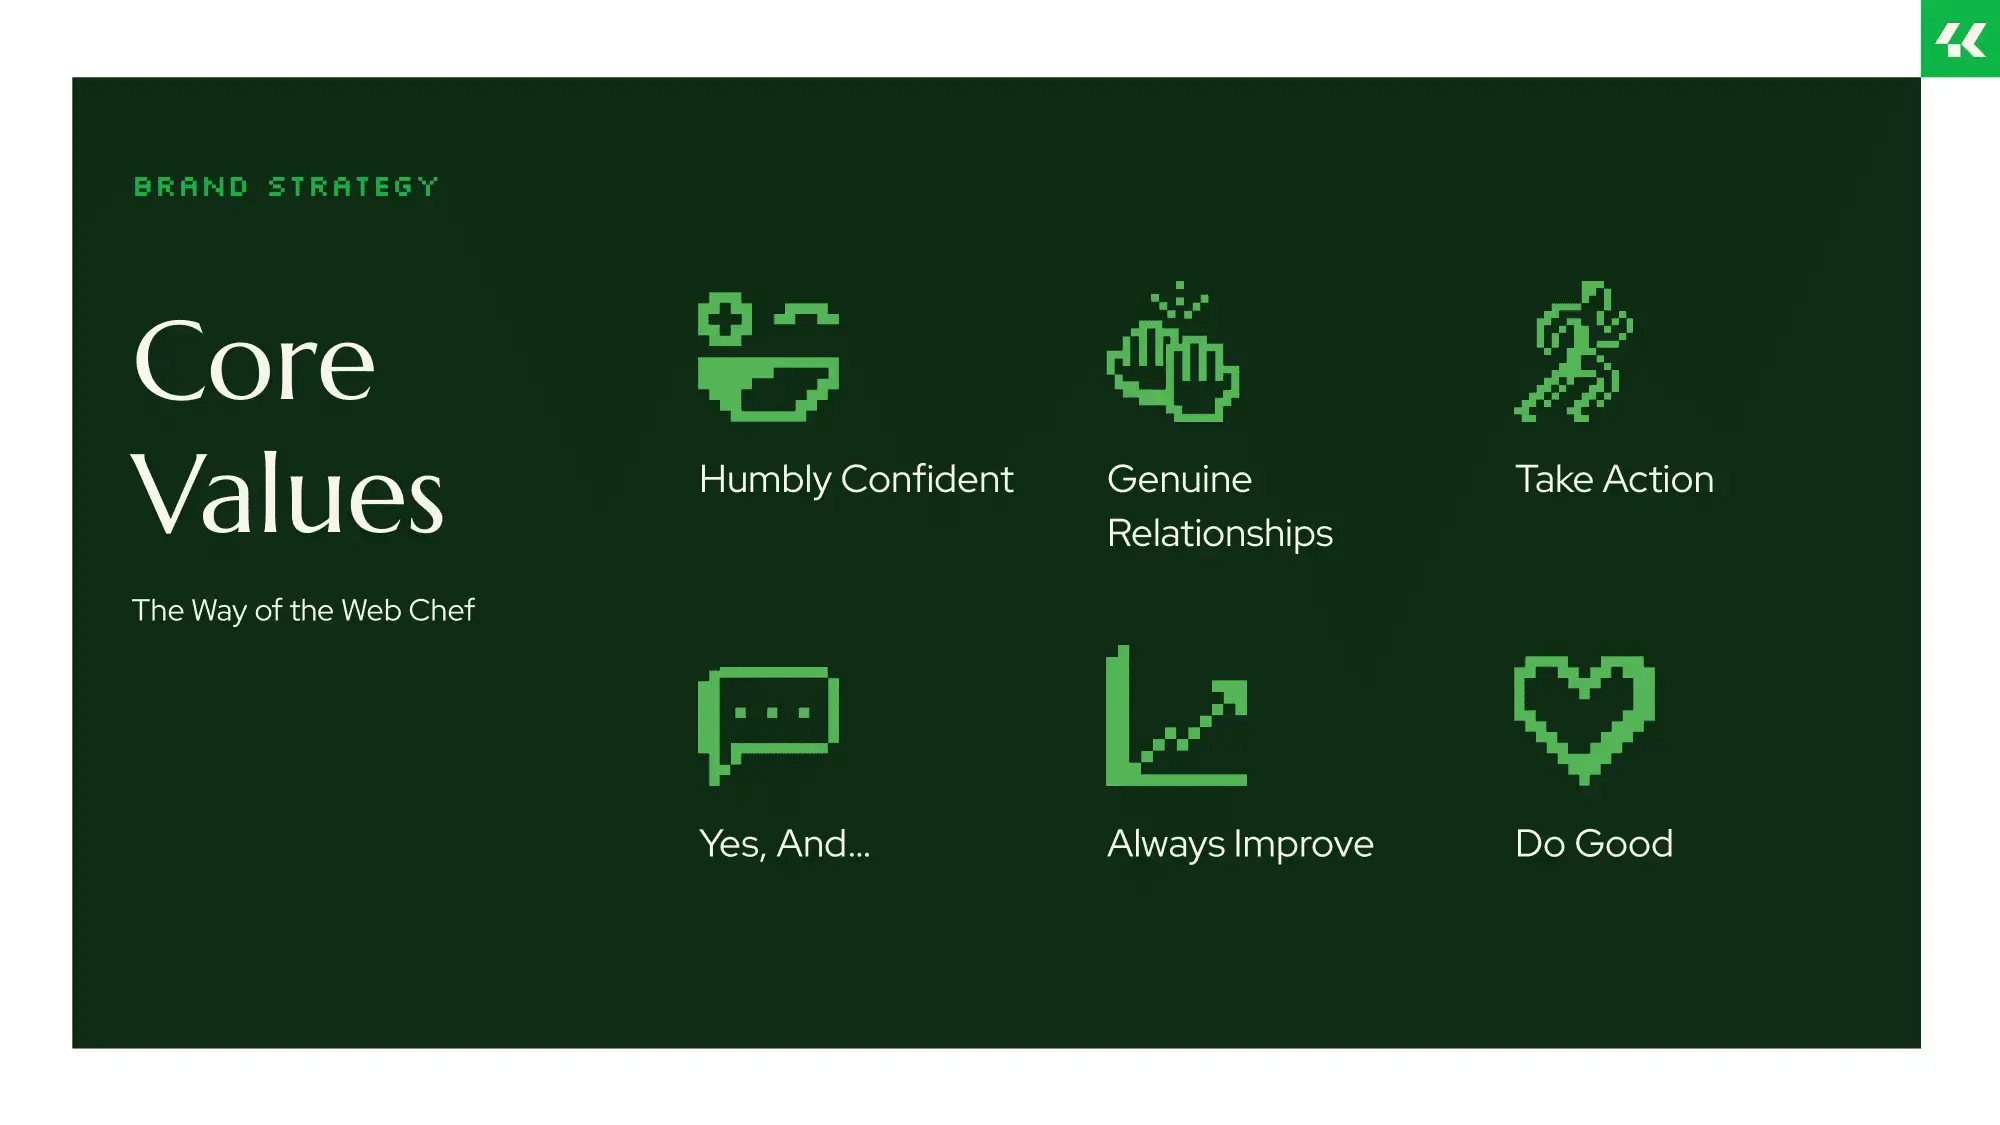 Graphic showing Four Kitchens' Core Values, also known as the Way of the Web Chef. They are: Humbly Confident, Genuine Relationships, Take Action, Yes And, Always Improve, and Do Good.